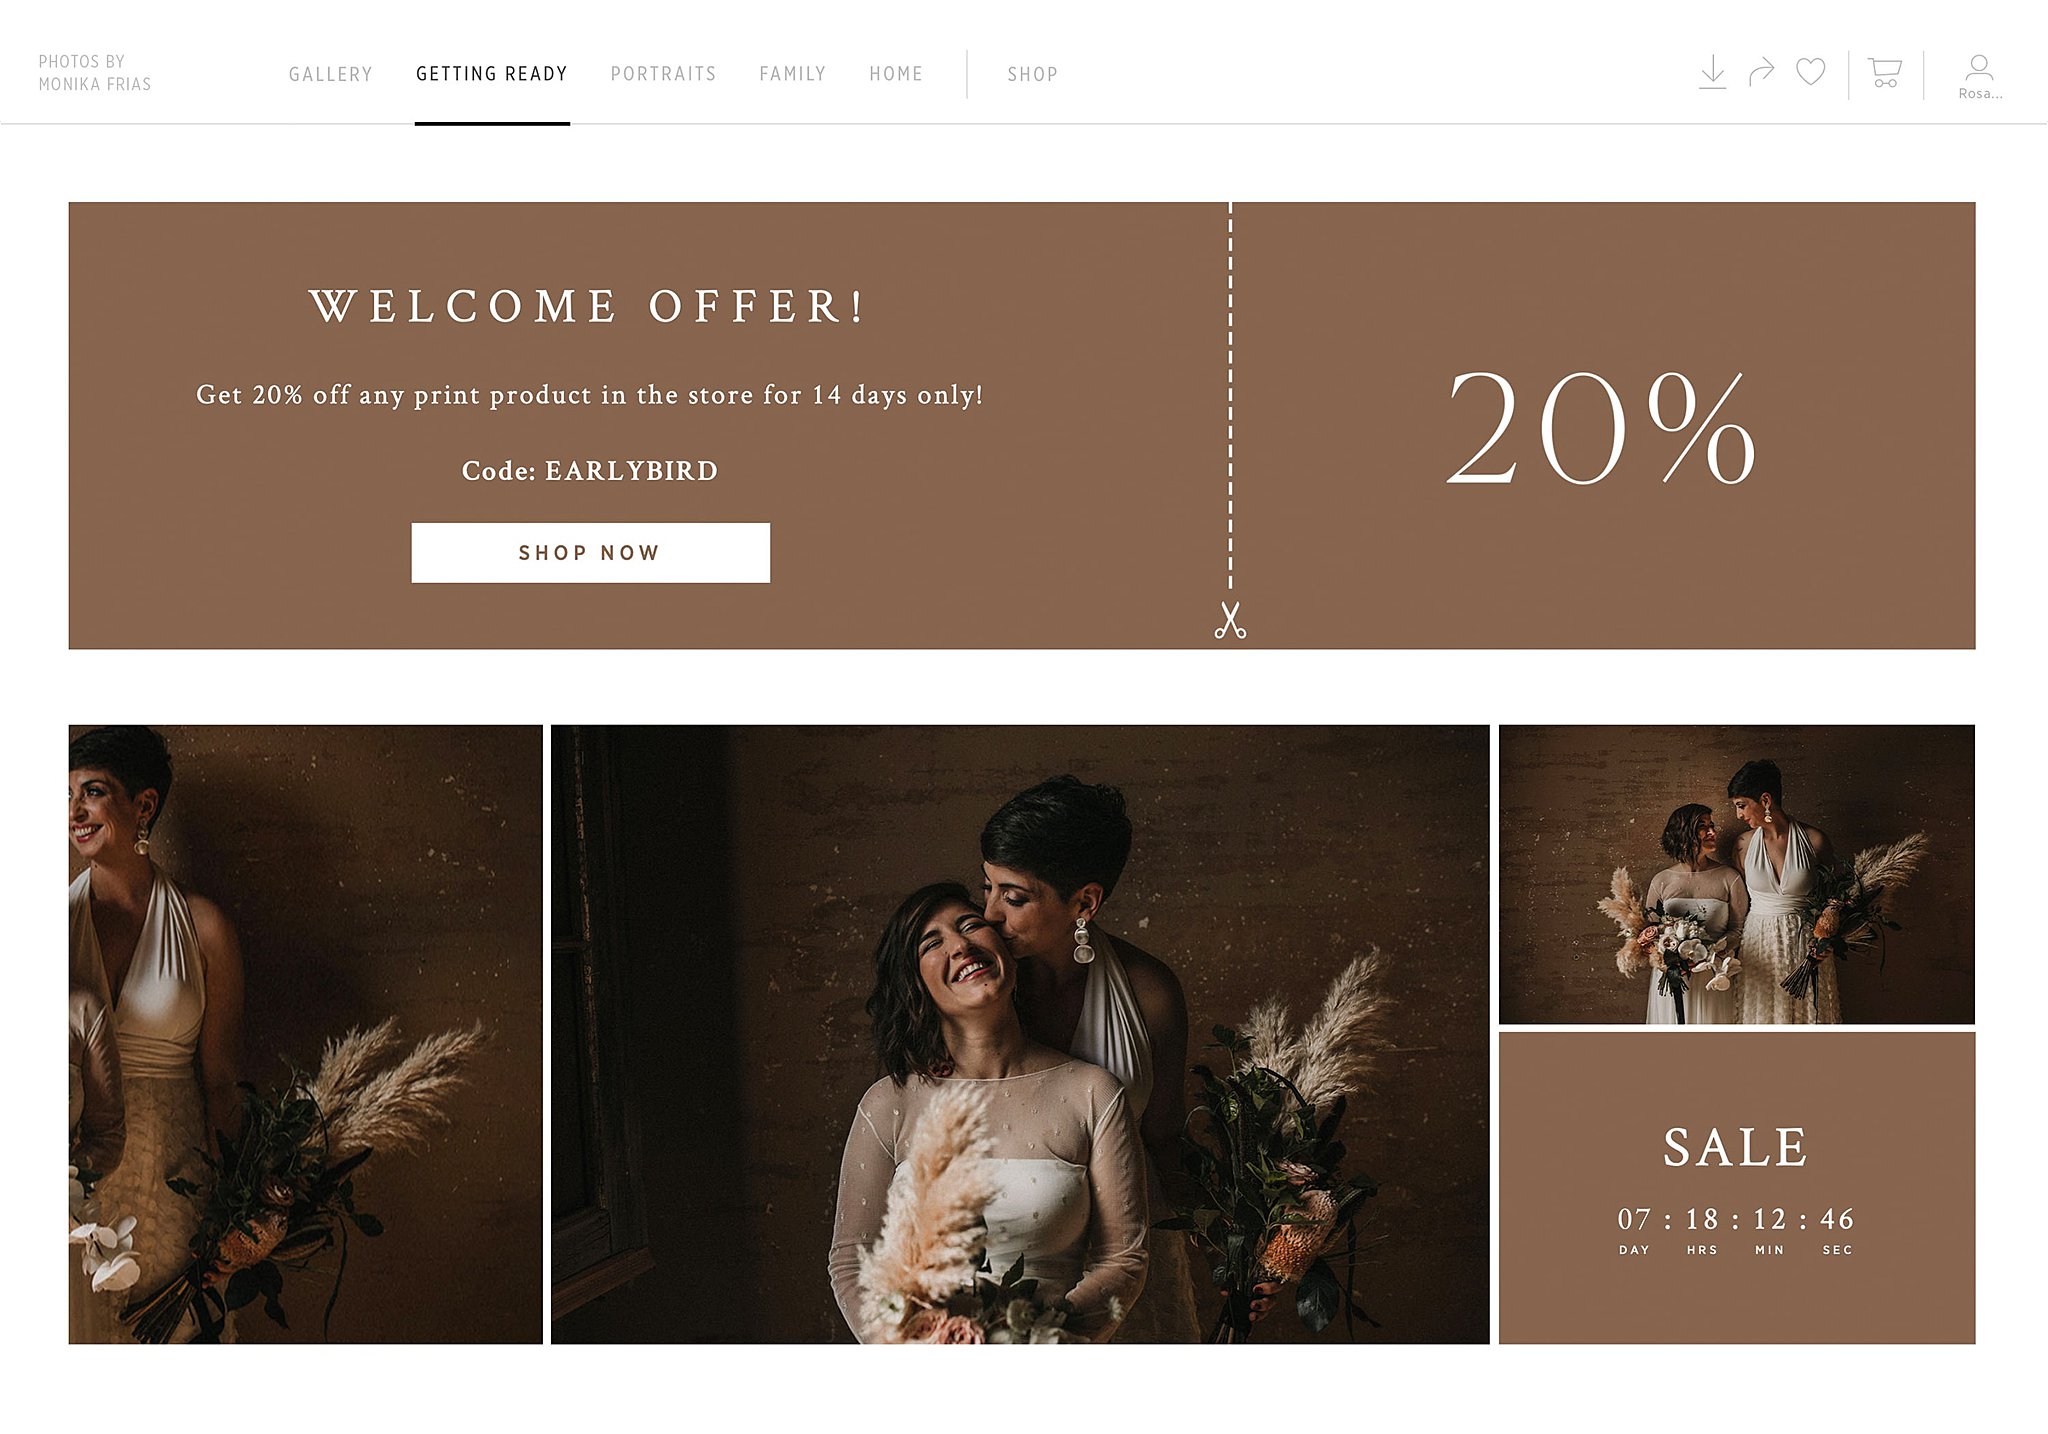 A 20% coupon with images of newlywed brides kissing and holding flowers client galleries for photographers